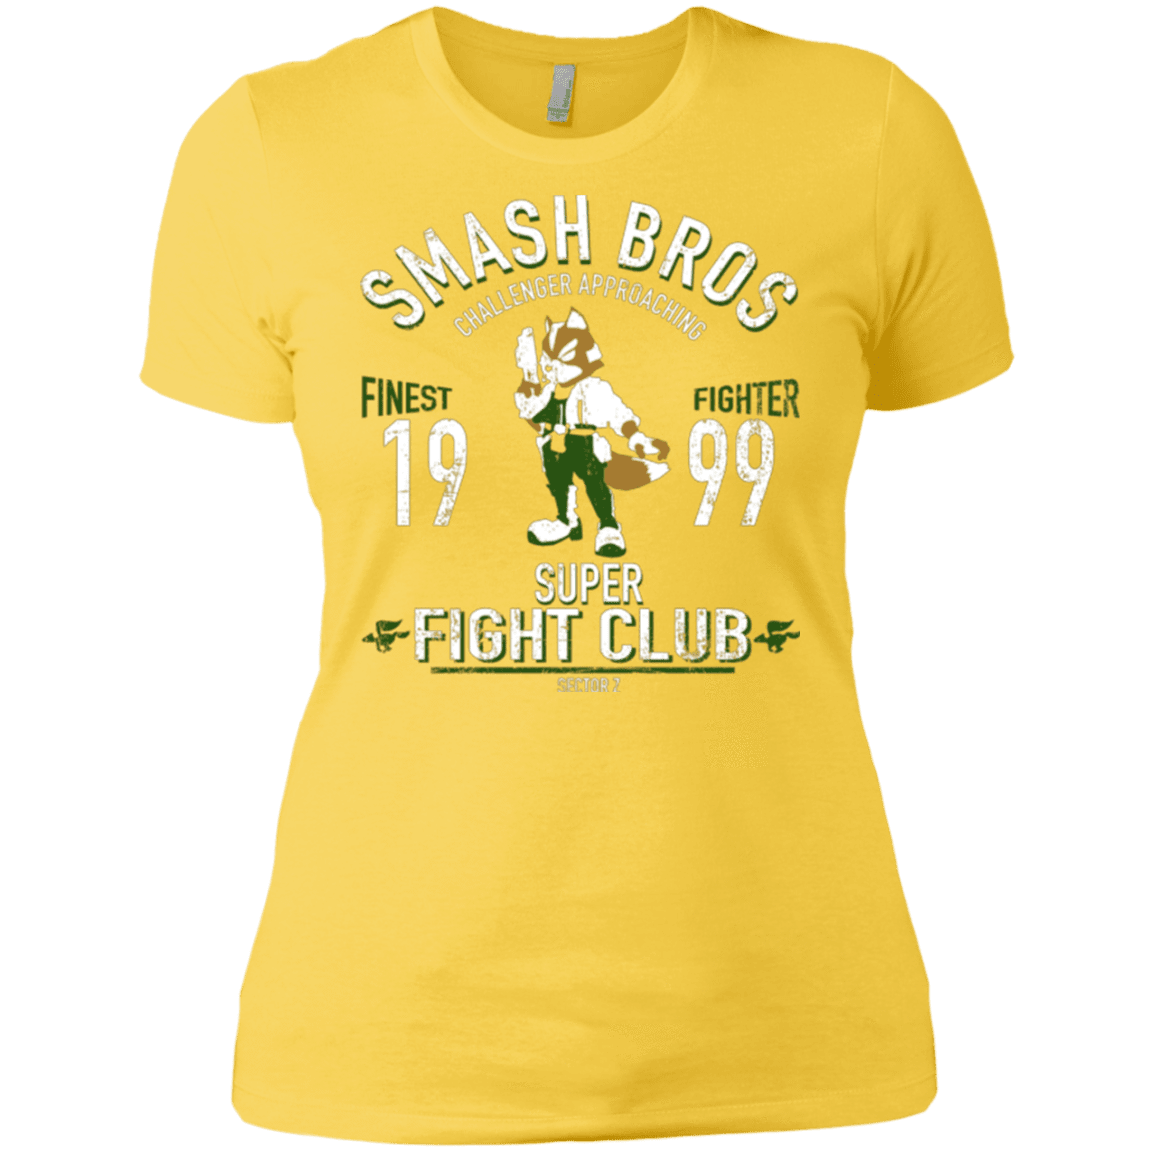 T-Shirts Vibrant Yellow / X-Small Sector Z Fighter Women's Premium T-Shirt